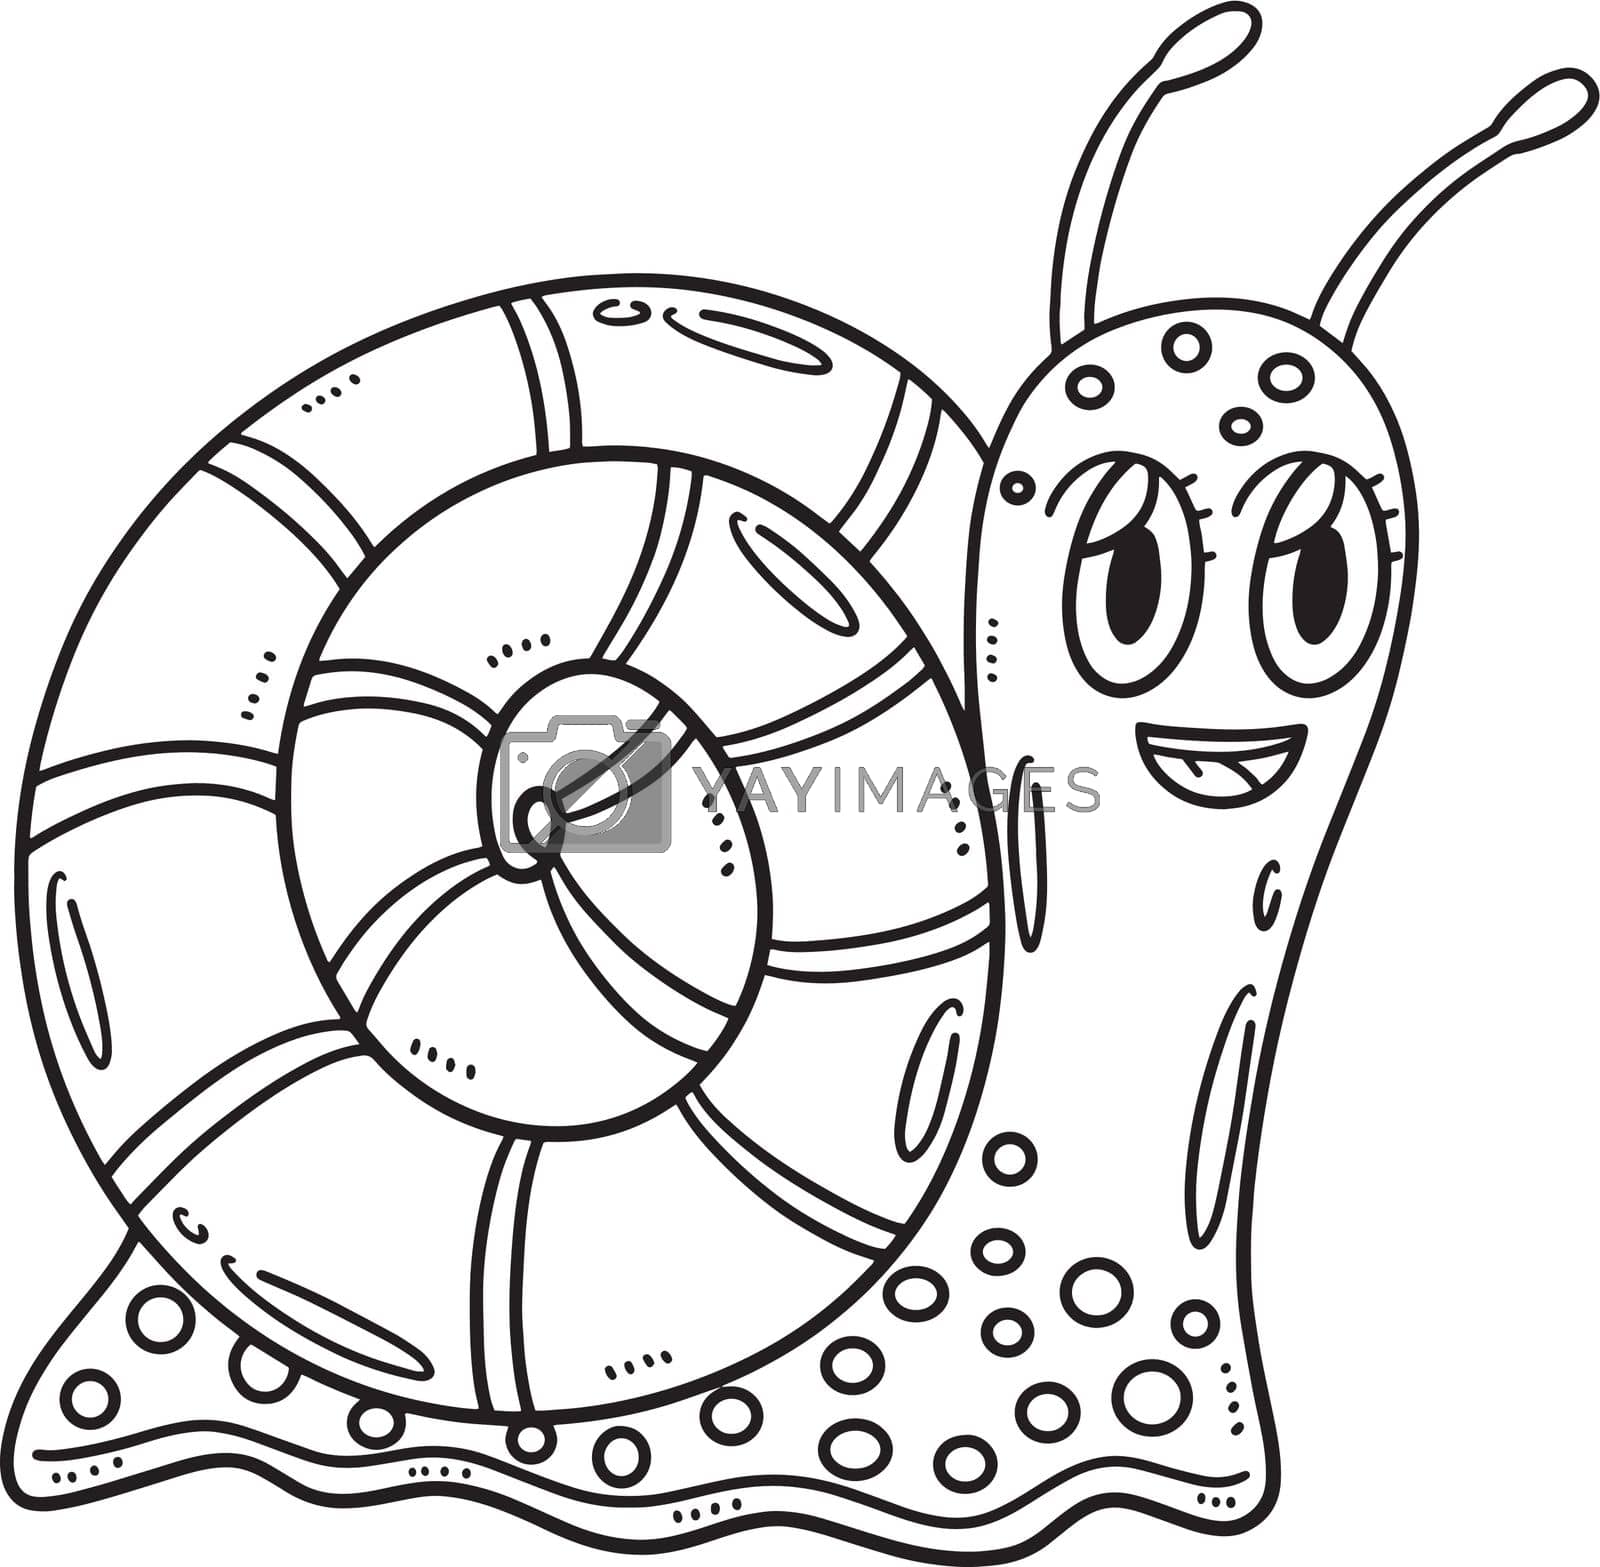 Royalty free image of Mother Snail Isolated Coloring Page for Kids by abbydesign